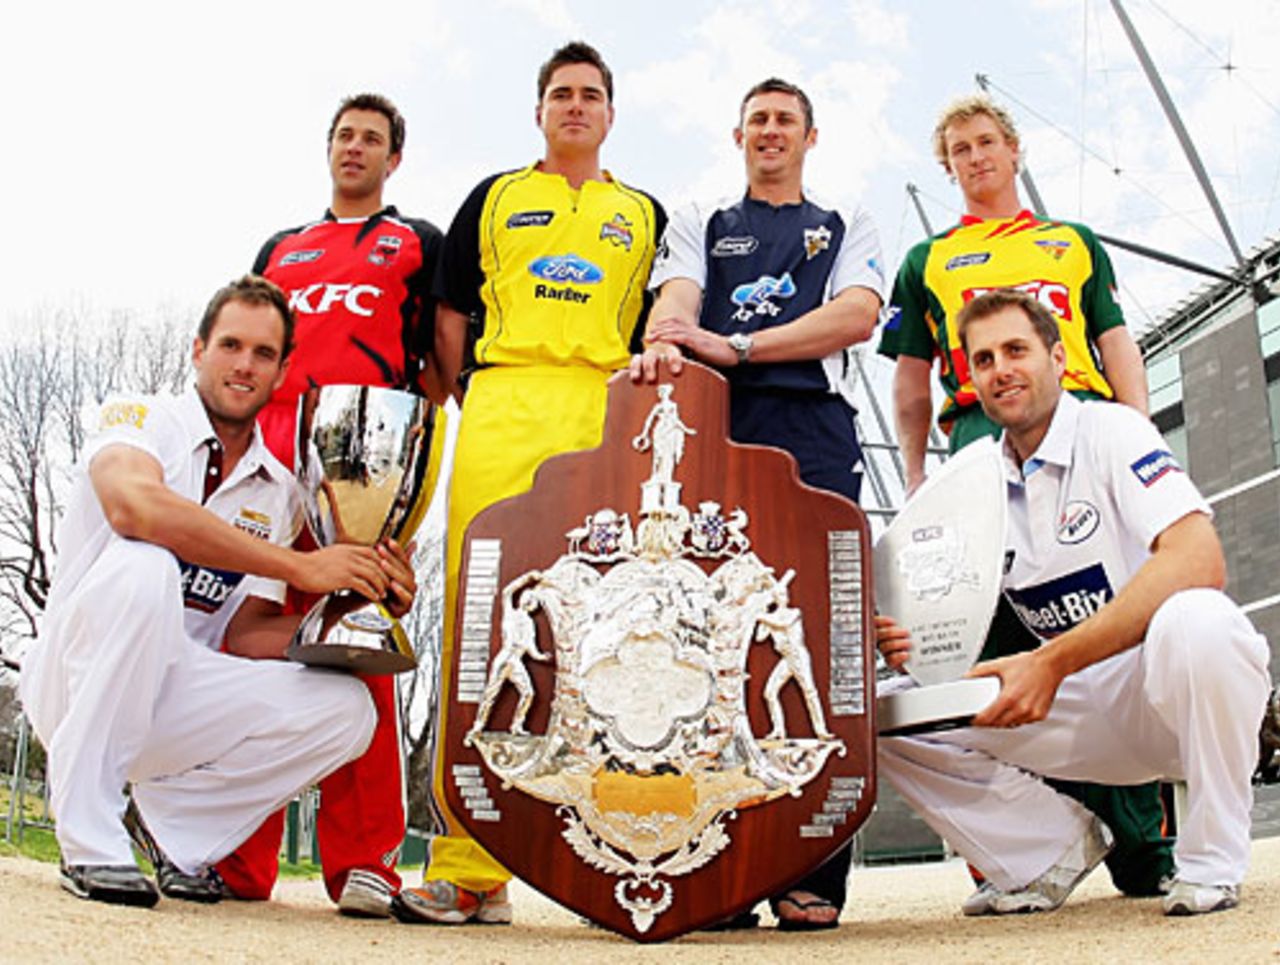 Australian state captains model the new season's uniforms and the domestic trophies, Melbourne